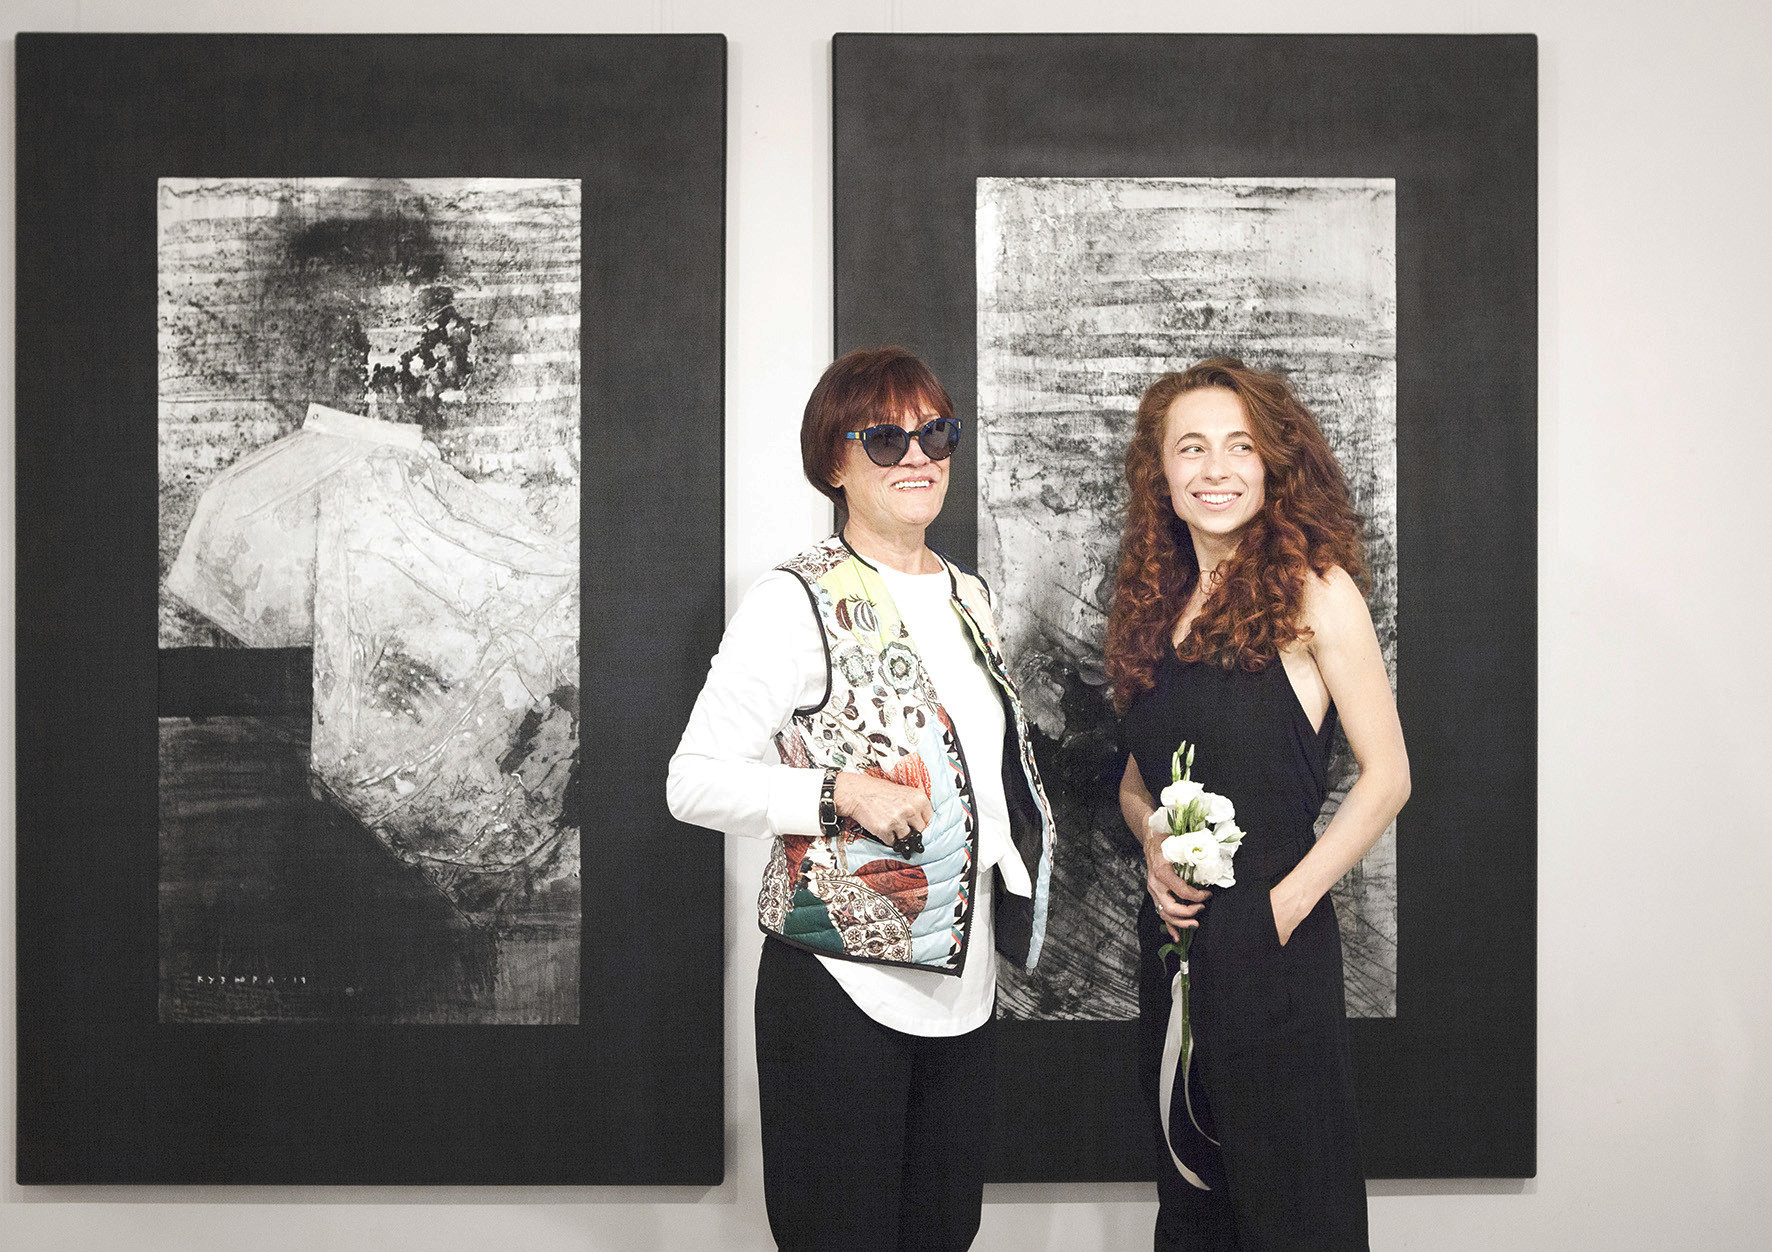 presentation of the "Amnesia" project in Triptych Art gallery